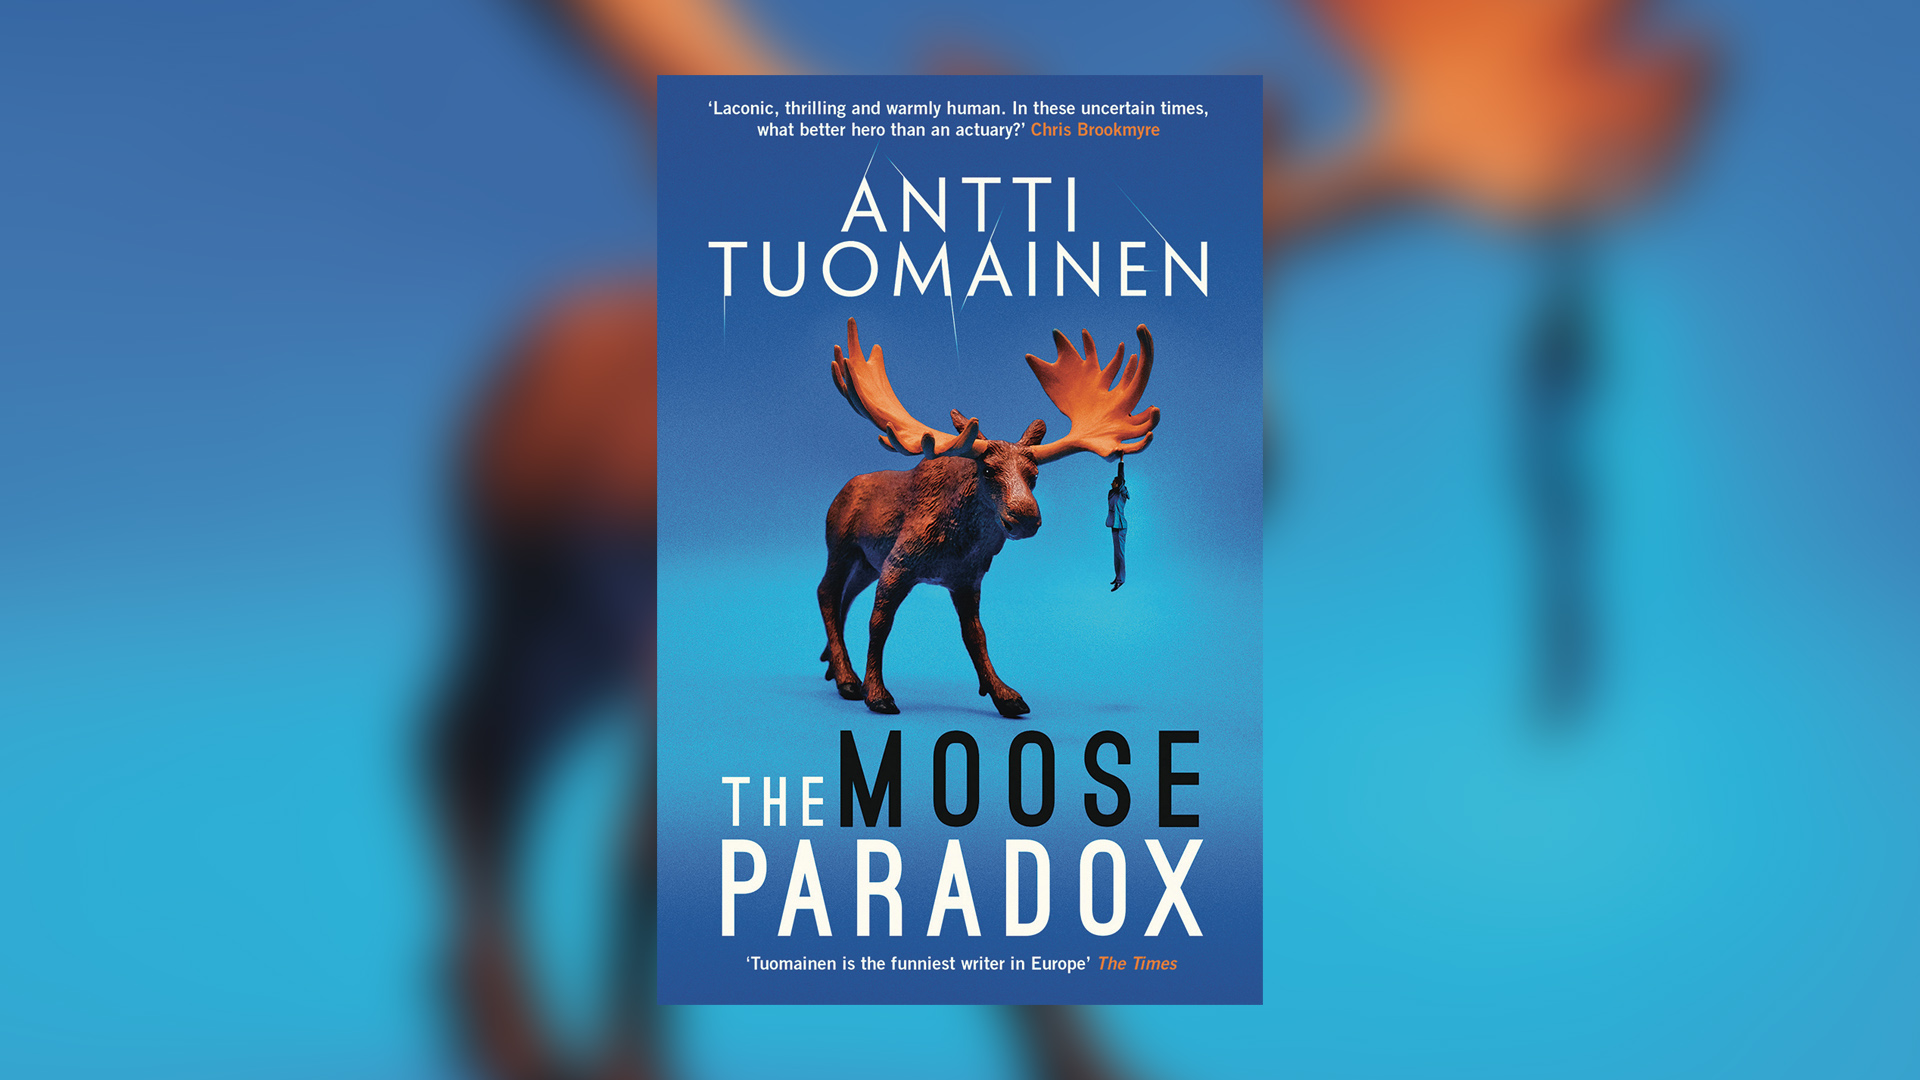 The Moose Paradox by Antti Tuomainen